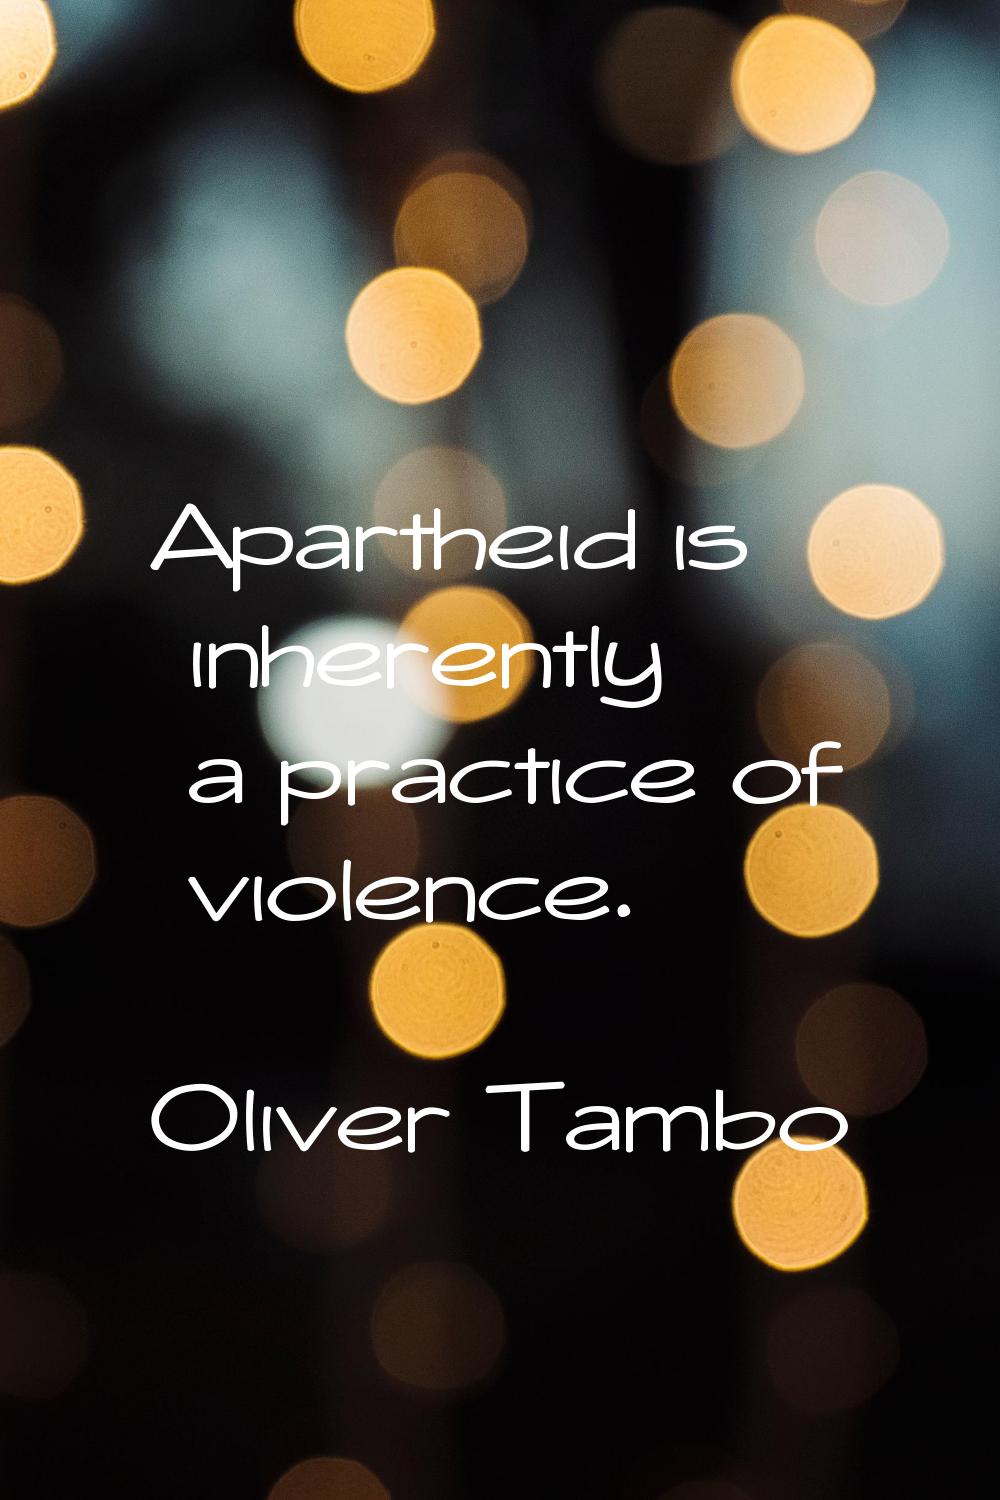 Apartheid is inherently a practice of violence.